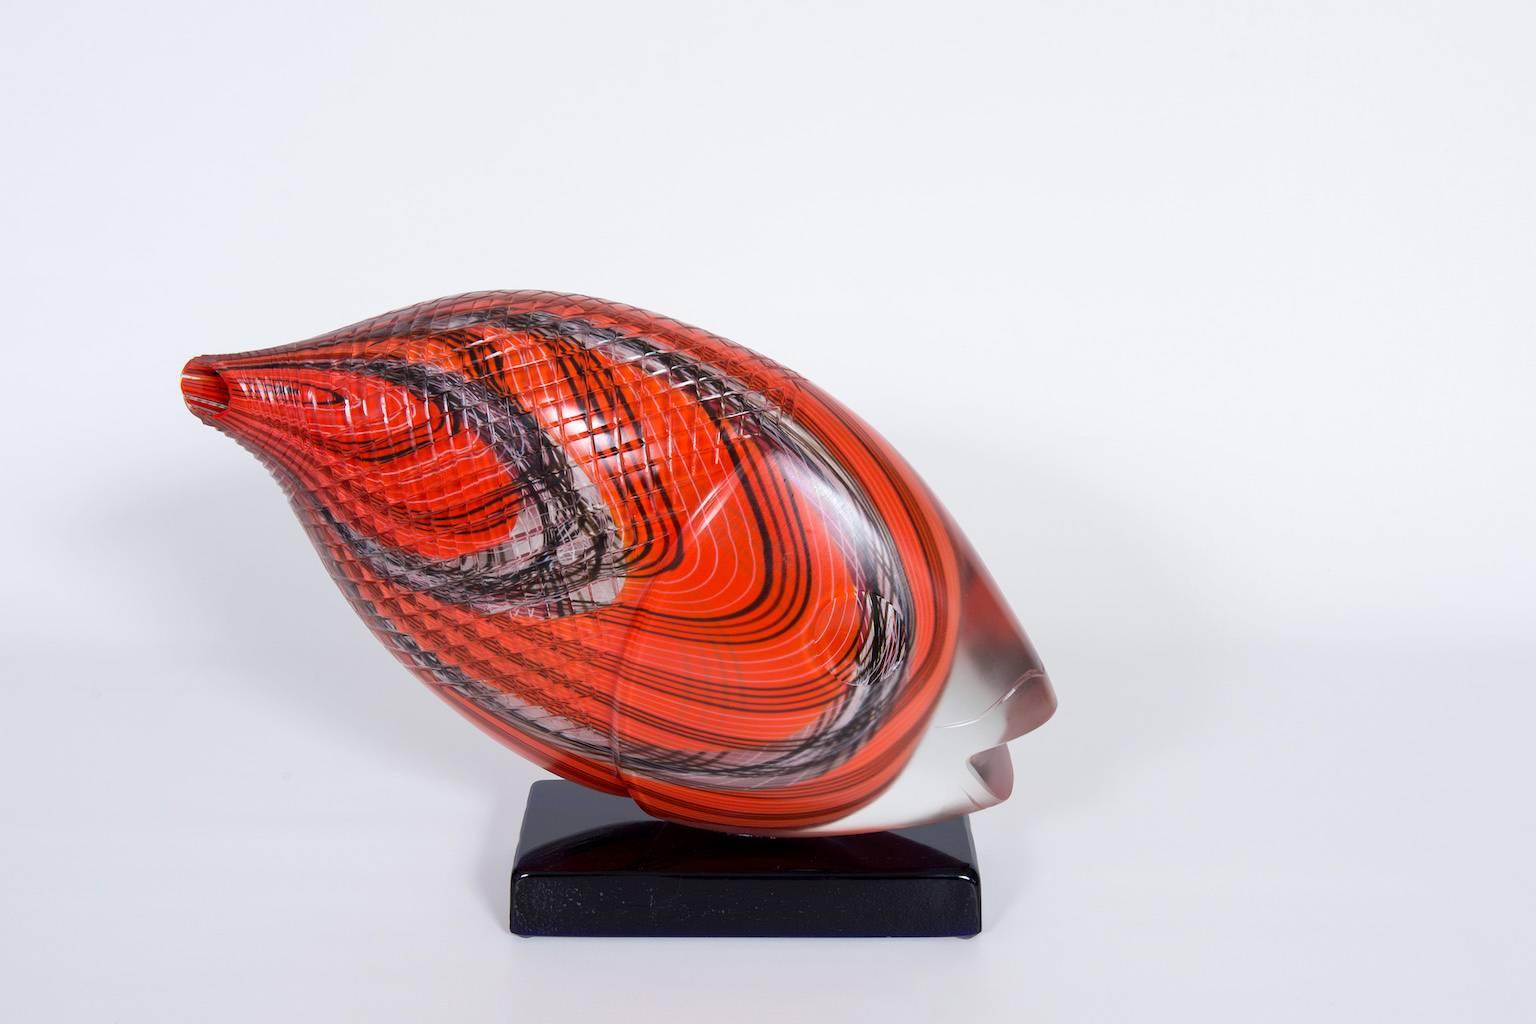 Astonished Italian Venetian, Fish Sculpture, Blown Murano Glass, Red, Opaque, Black, 1990s.
This amazing sculpture is composed by a black basement all in blown Murano glass, where the fish abstract sculpture is accommodated.
The abstract fish is a